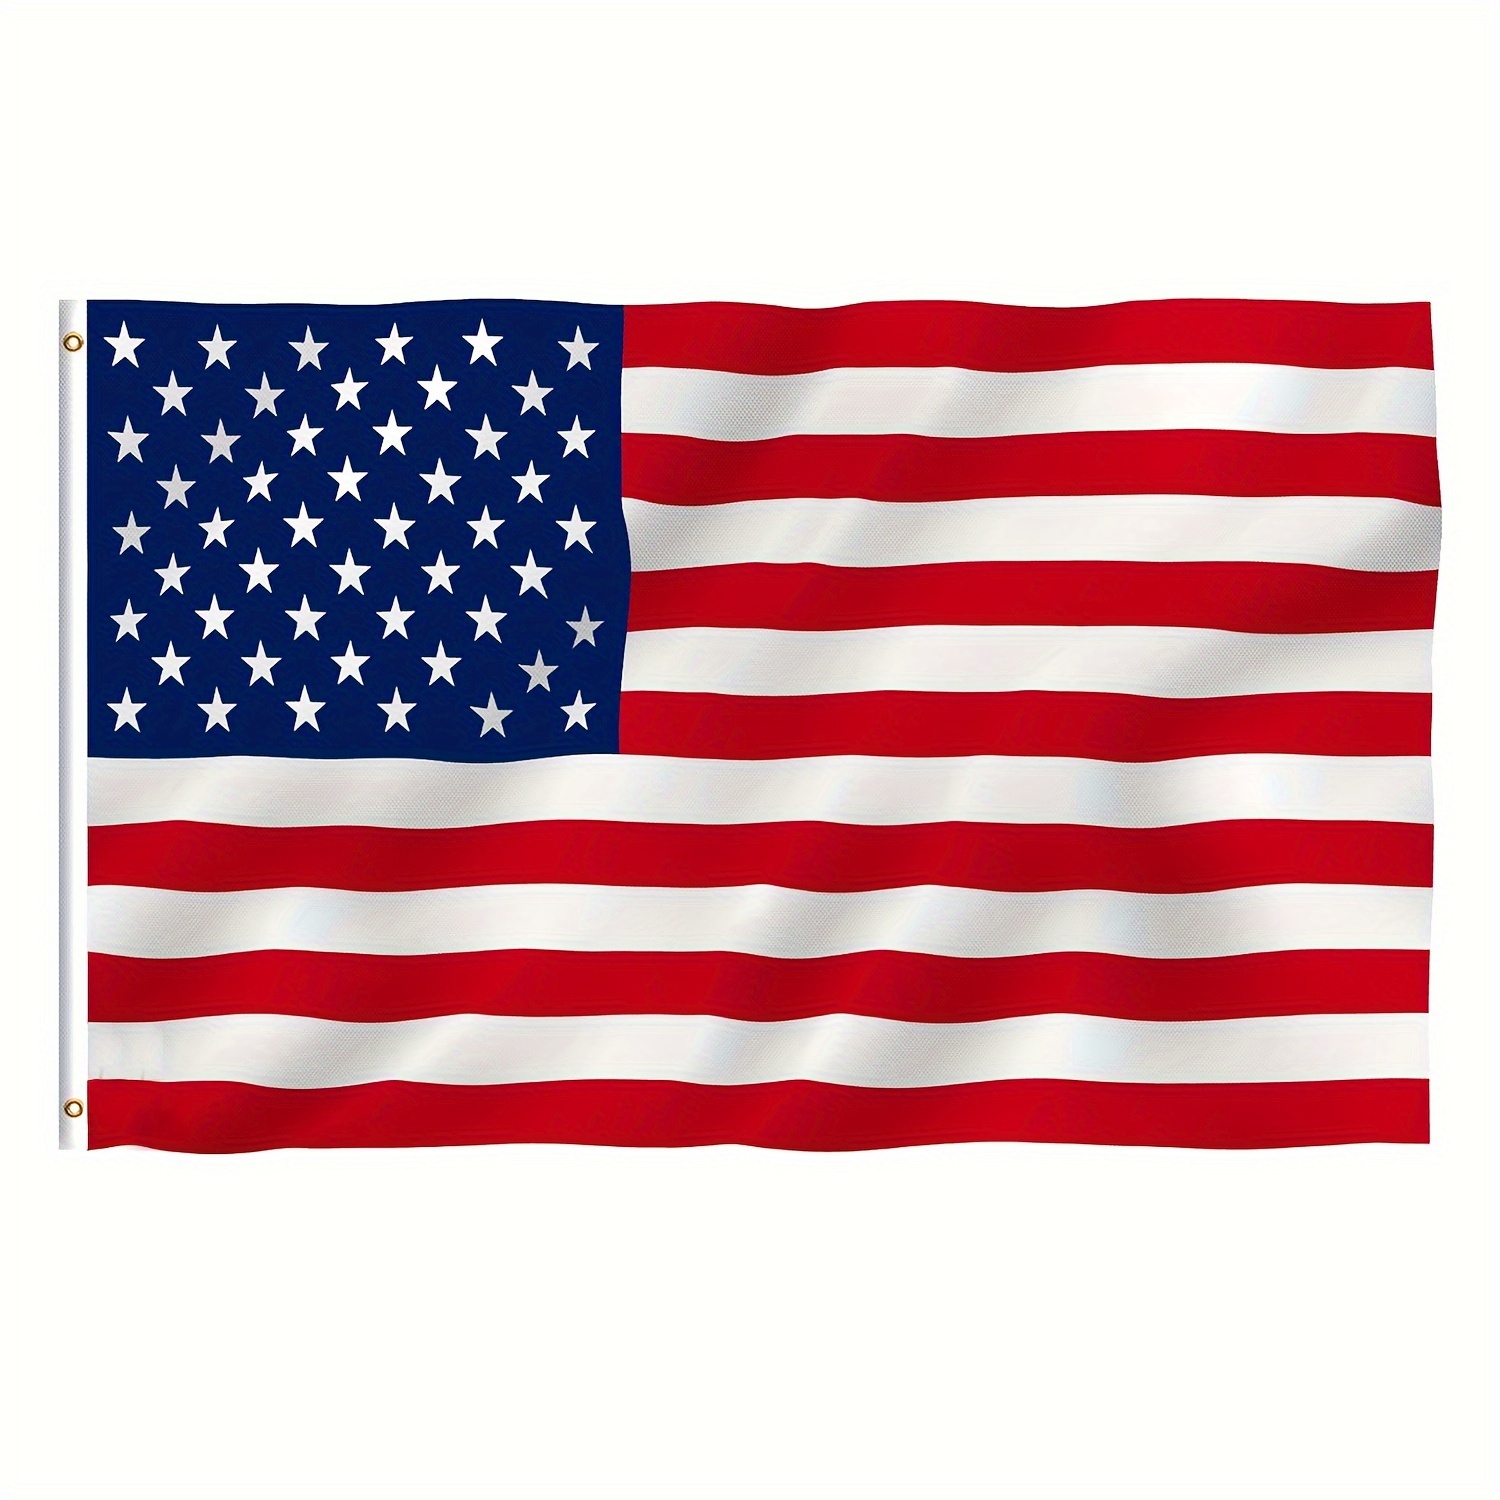 

1pc, Fly Breeze, 3x5 Foot American Us Flag, Vivid Color Double Stitched, Usa Flags, Polyester With Brass Grommets, Home Decor, Outdoor Decor, Yard Decor, Garden Decorations